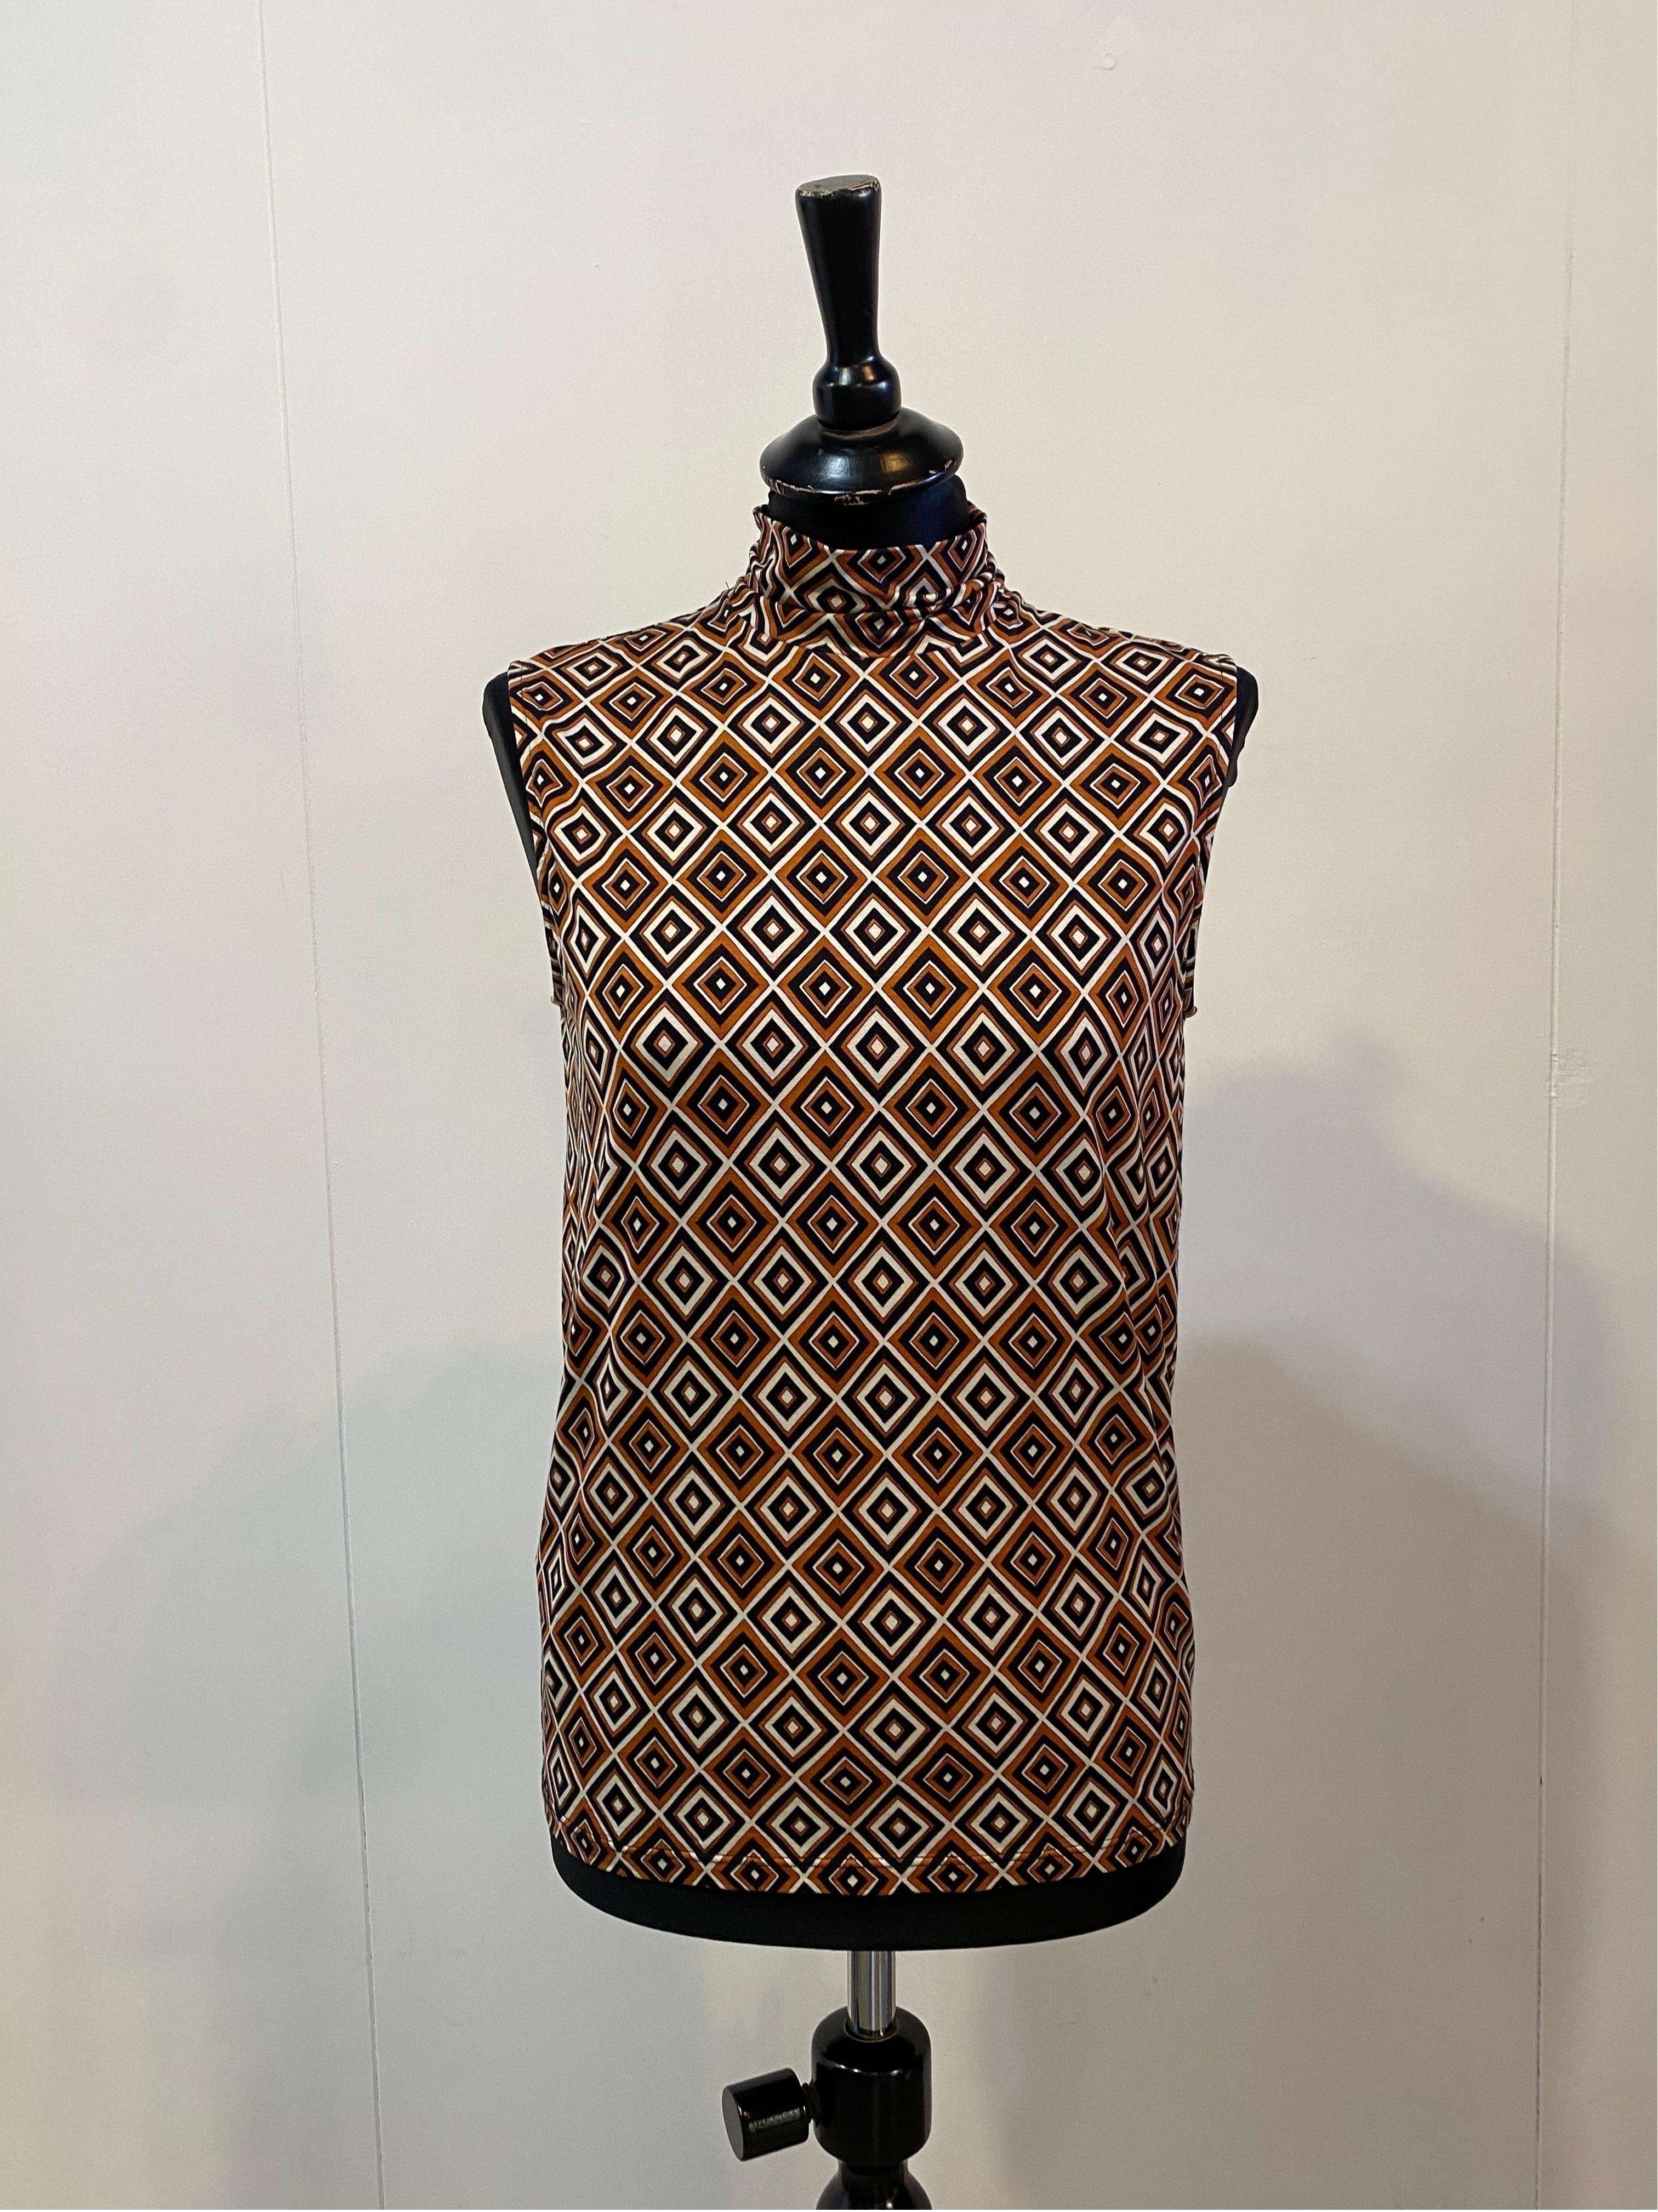 PRADA ENSEMBLE.
Fall 2012 collection.
Sleeveless top + trousers.
60s pattern in shades of orange.
The top is in silk and elastane. Very soft material.
Italian size 42
Bust 44 cm
Length 59 cm
The trousers are made of virgin wool, polyamide and